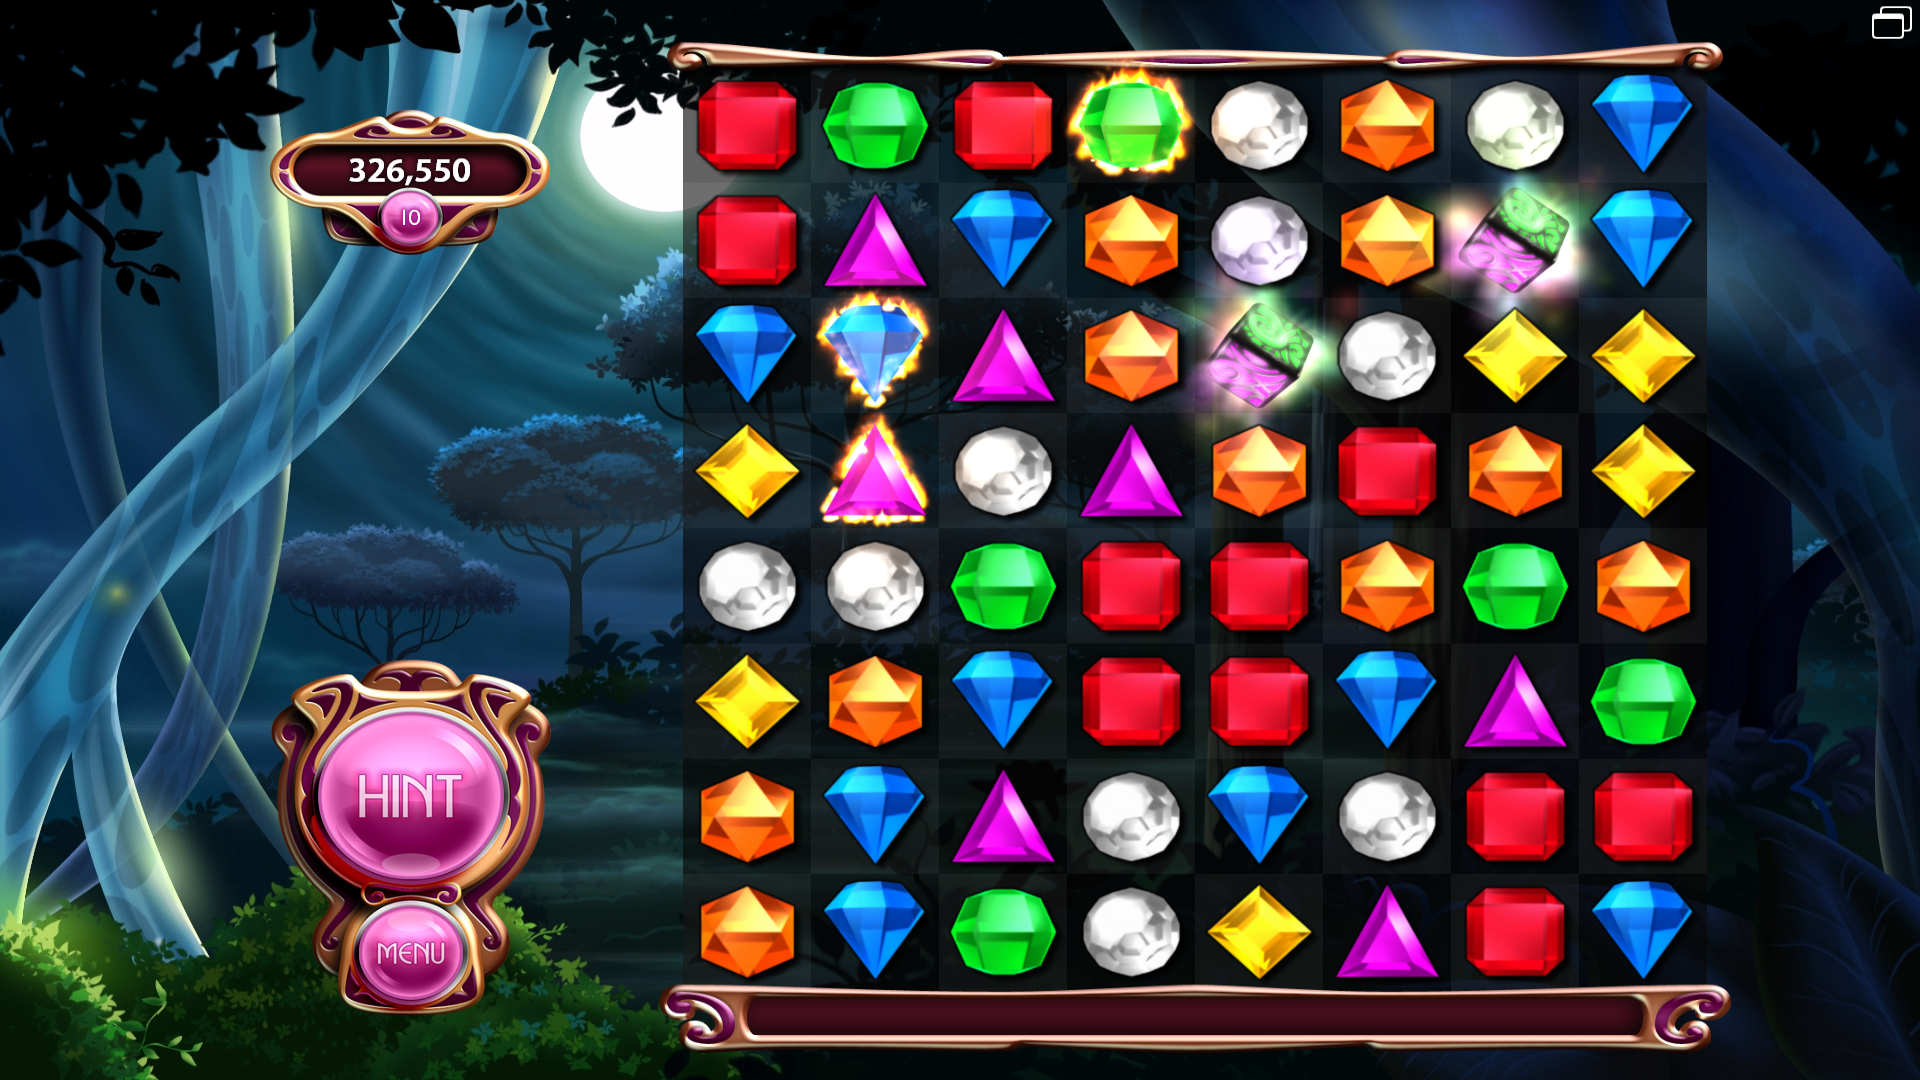 download bejeweled 3 full version for free